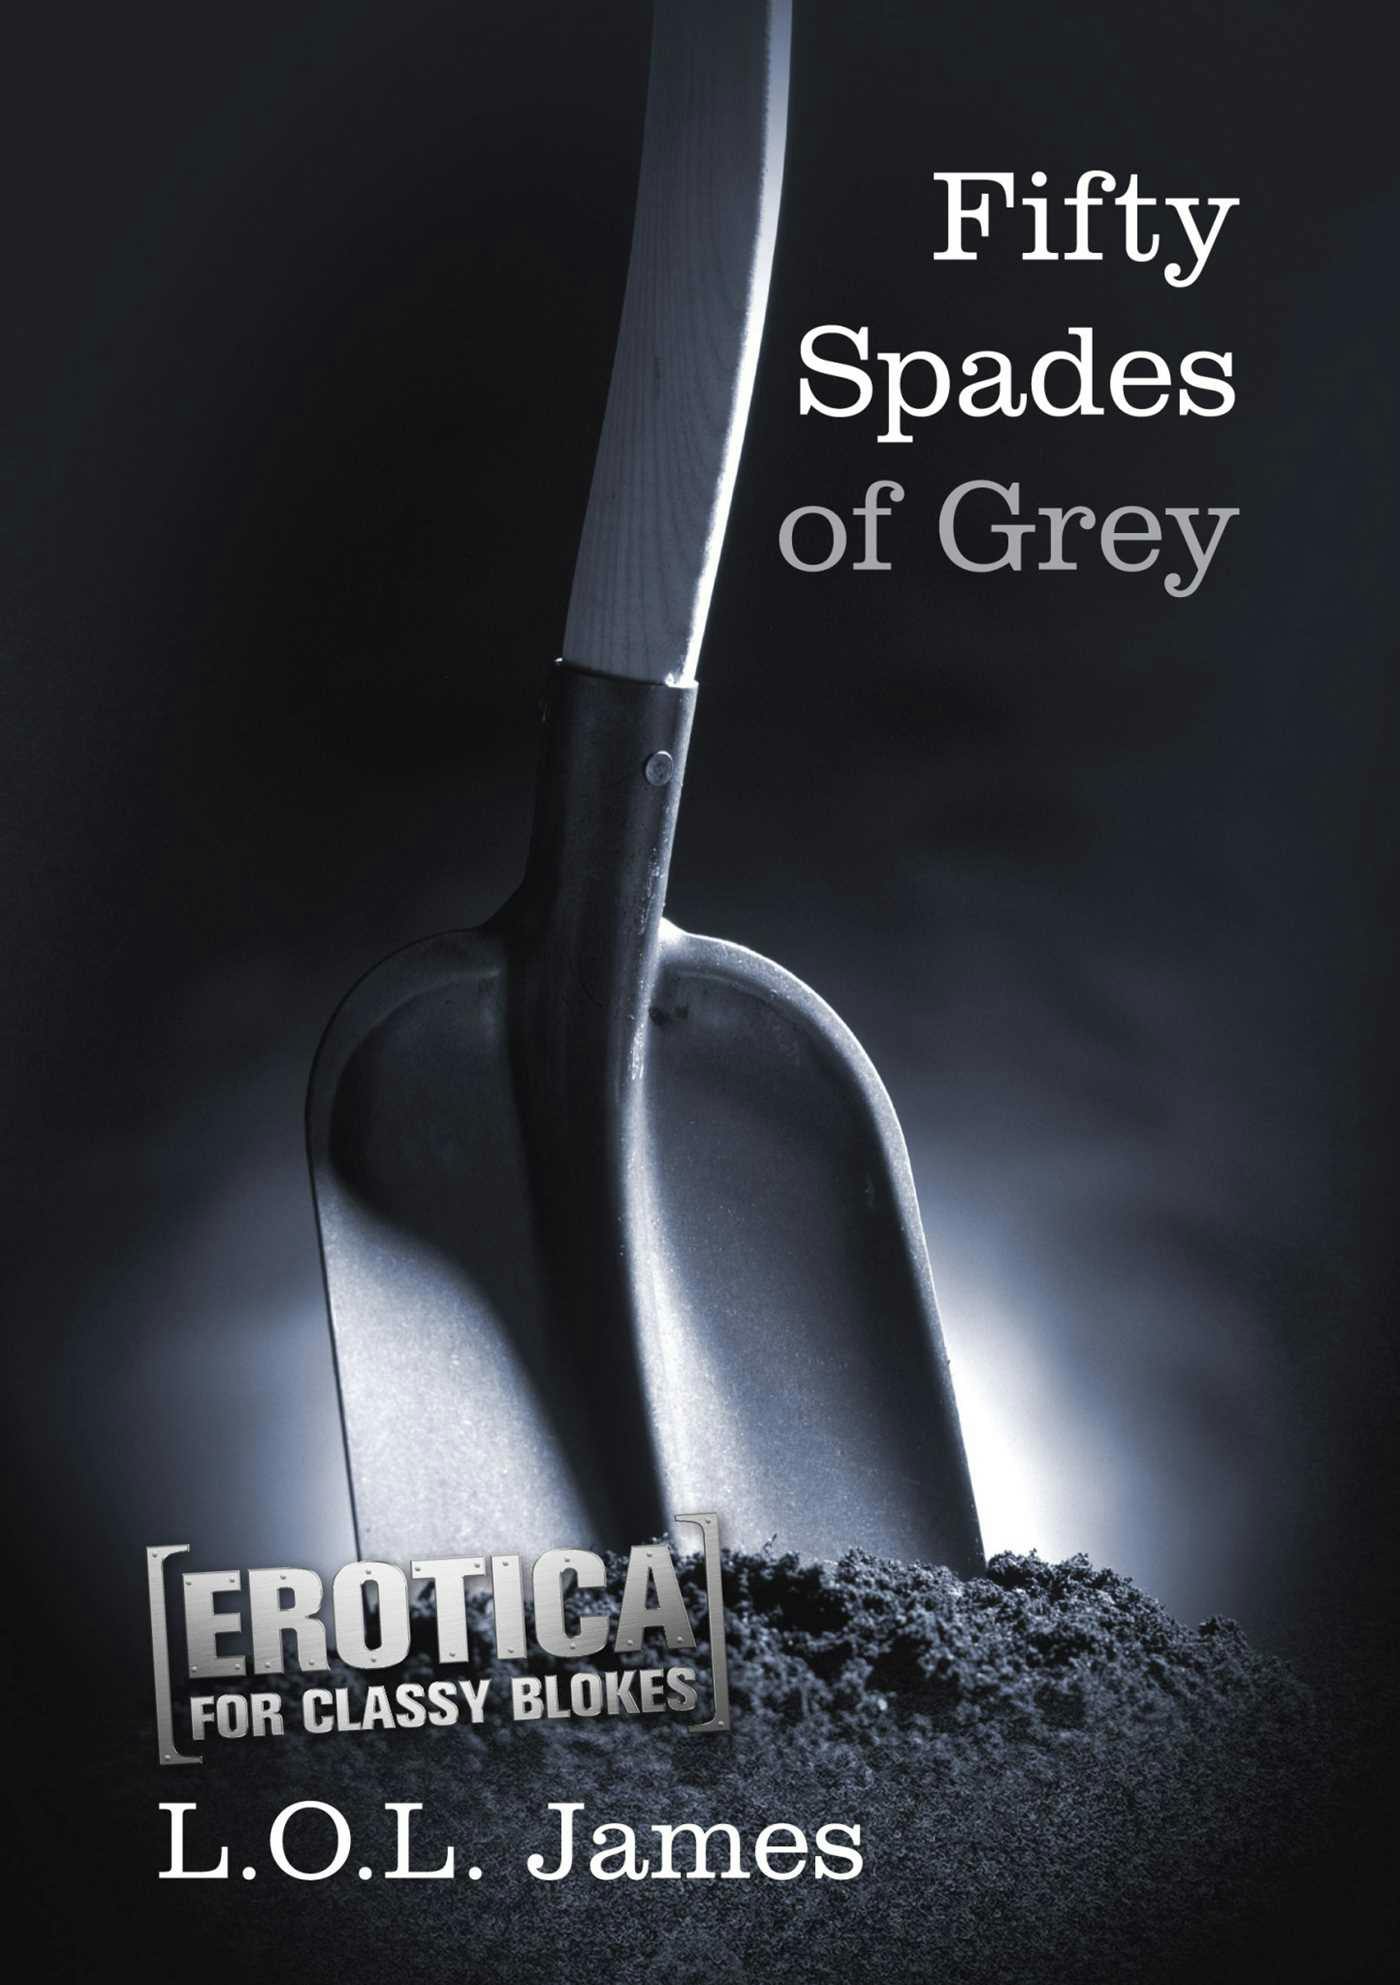 Fifty Spades of Grey: Erotica for classy blokes - L.O.L. James